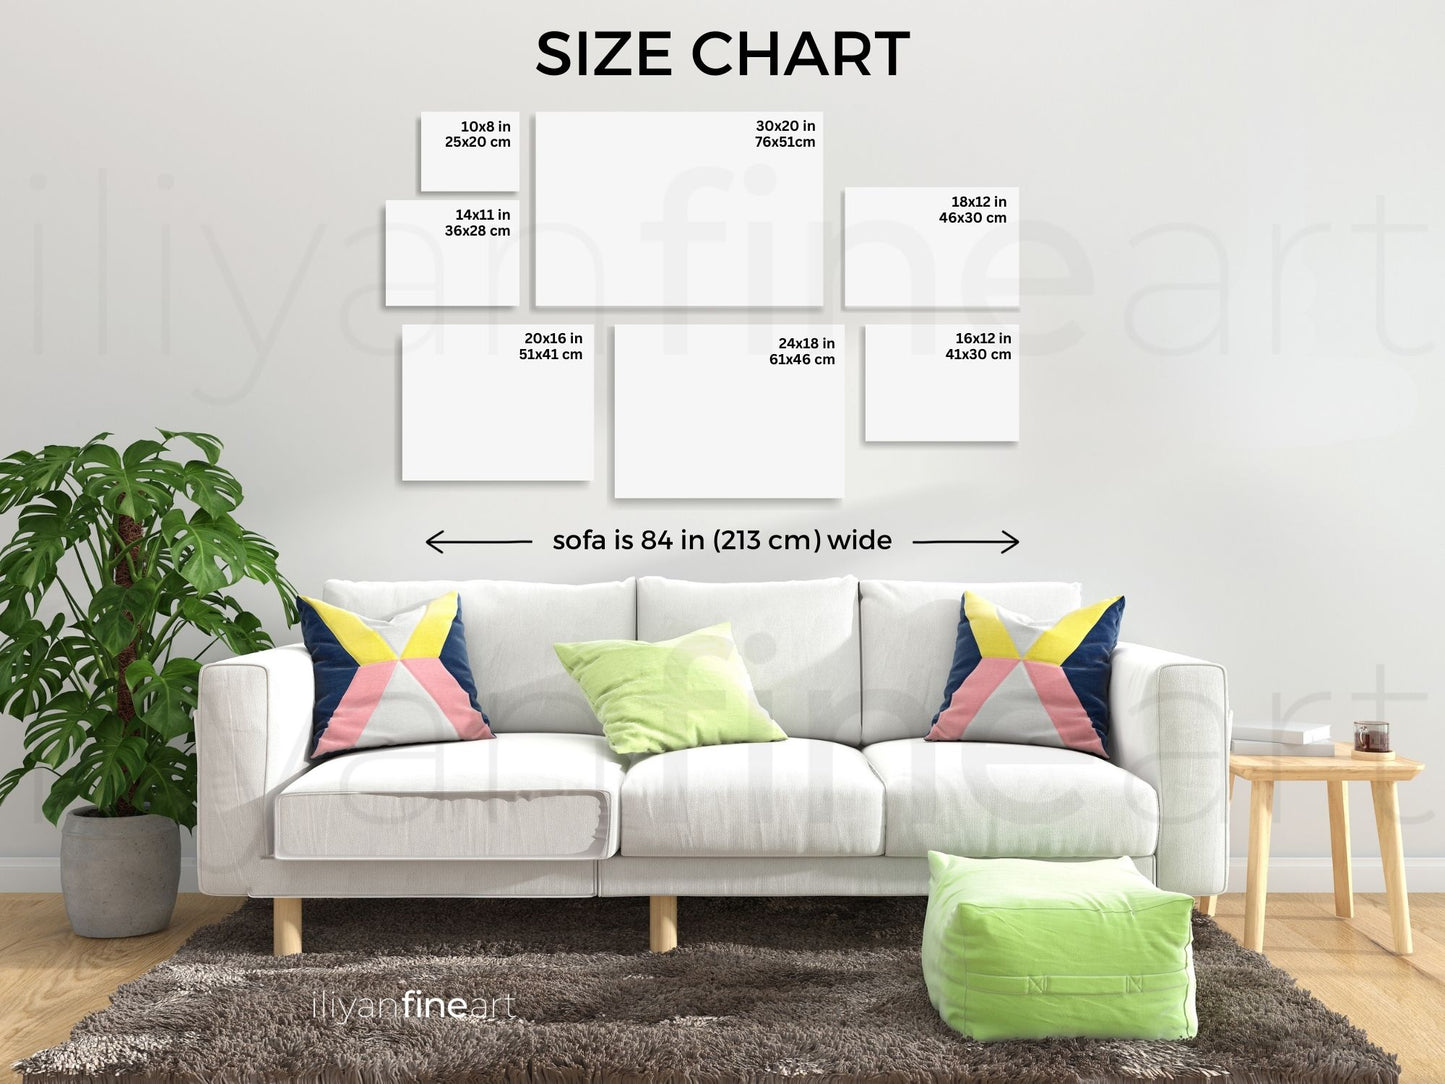 Whirlstructure I - Unframed Satin Poster Print